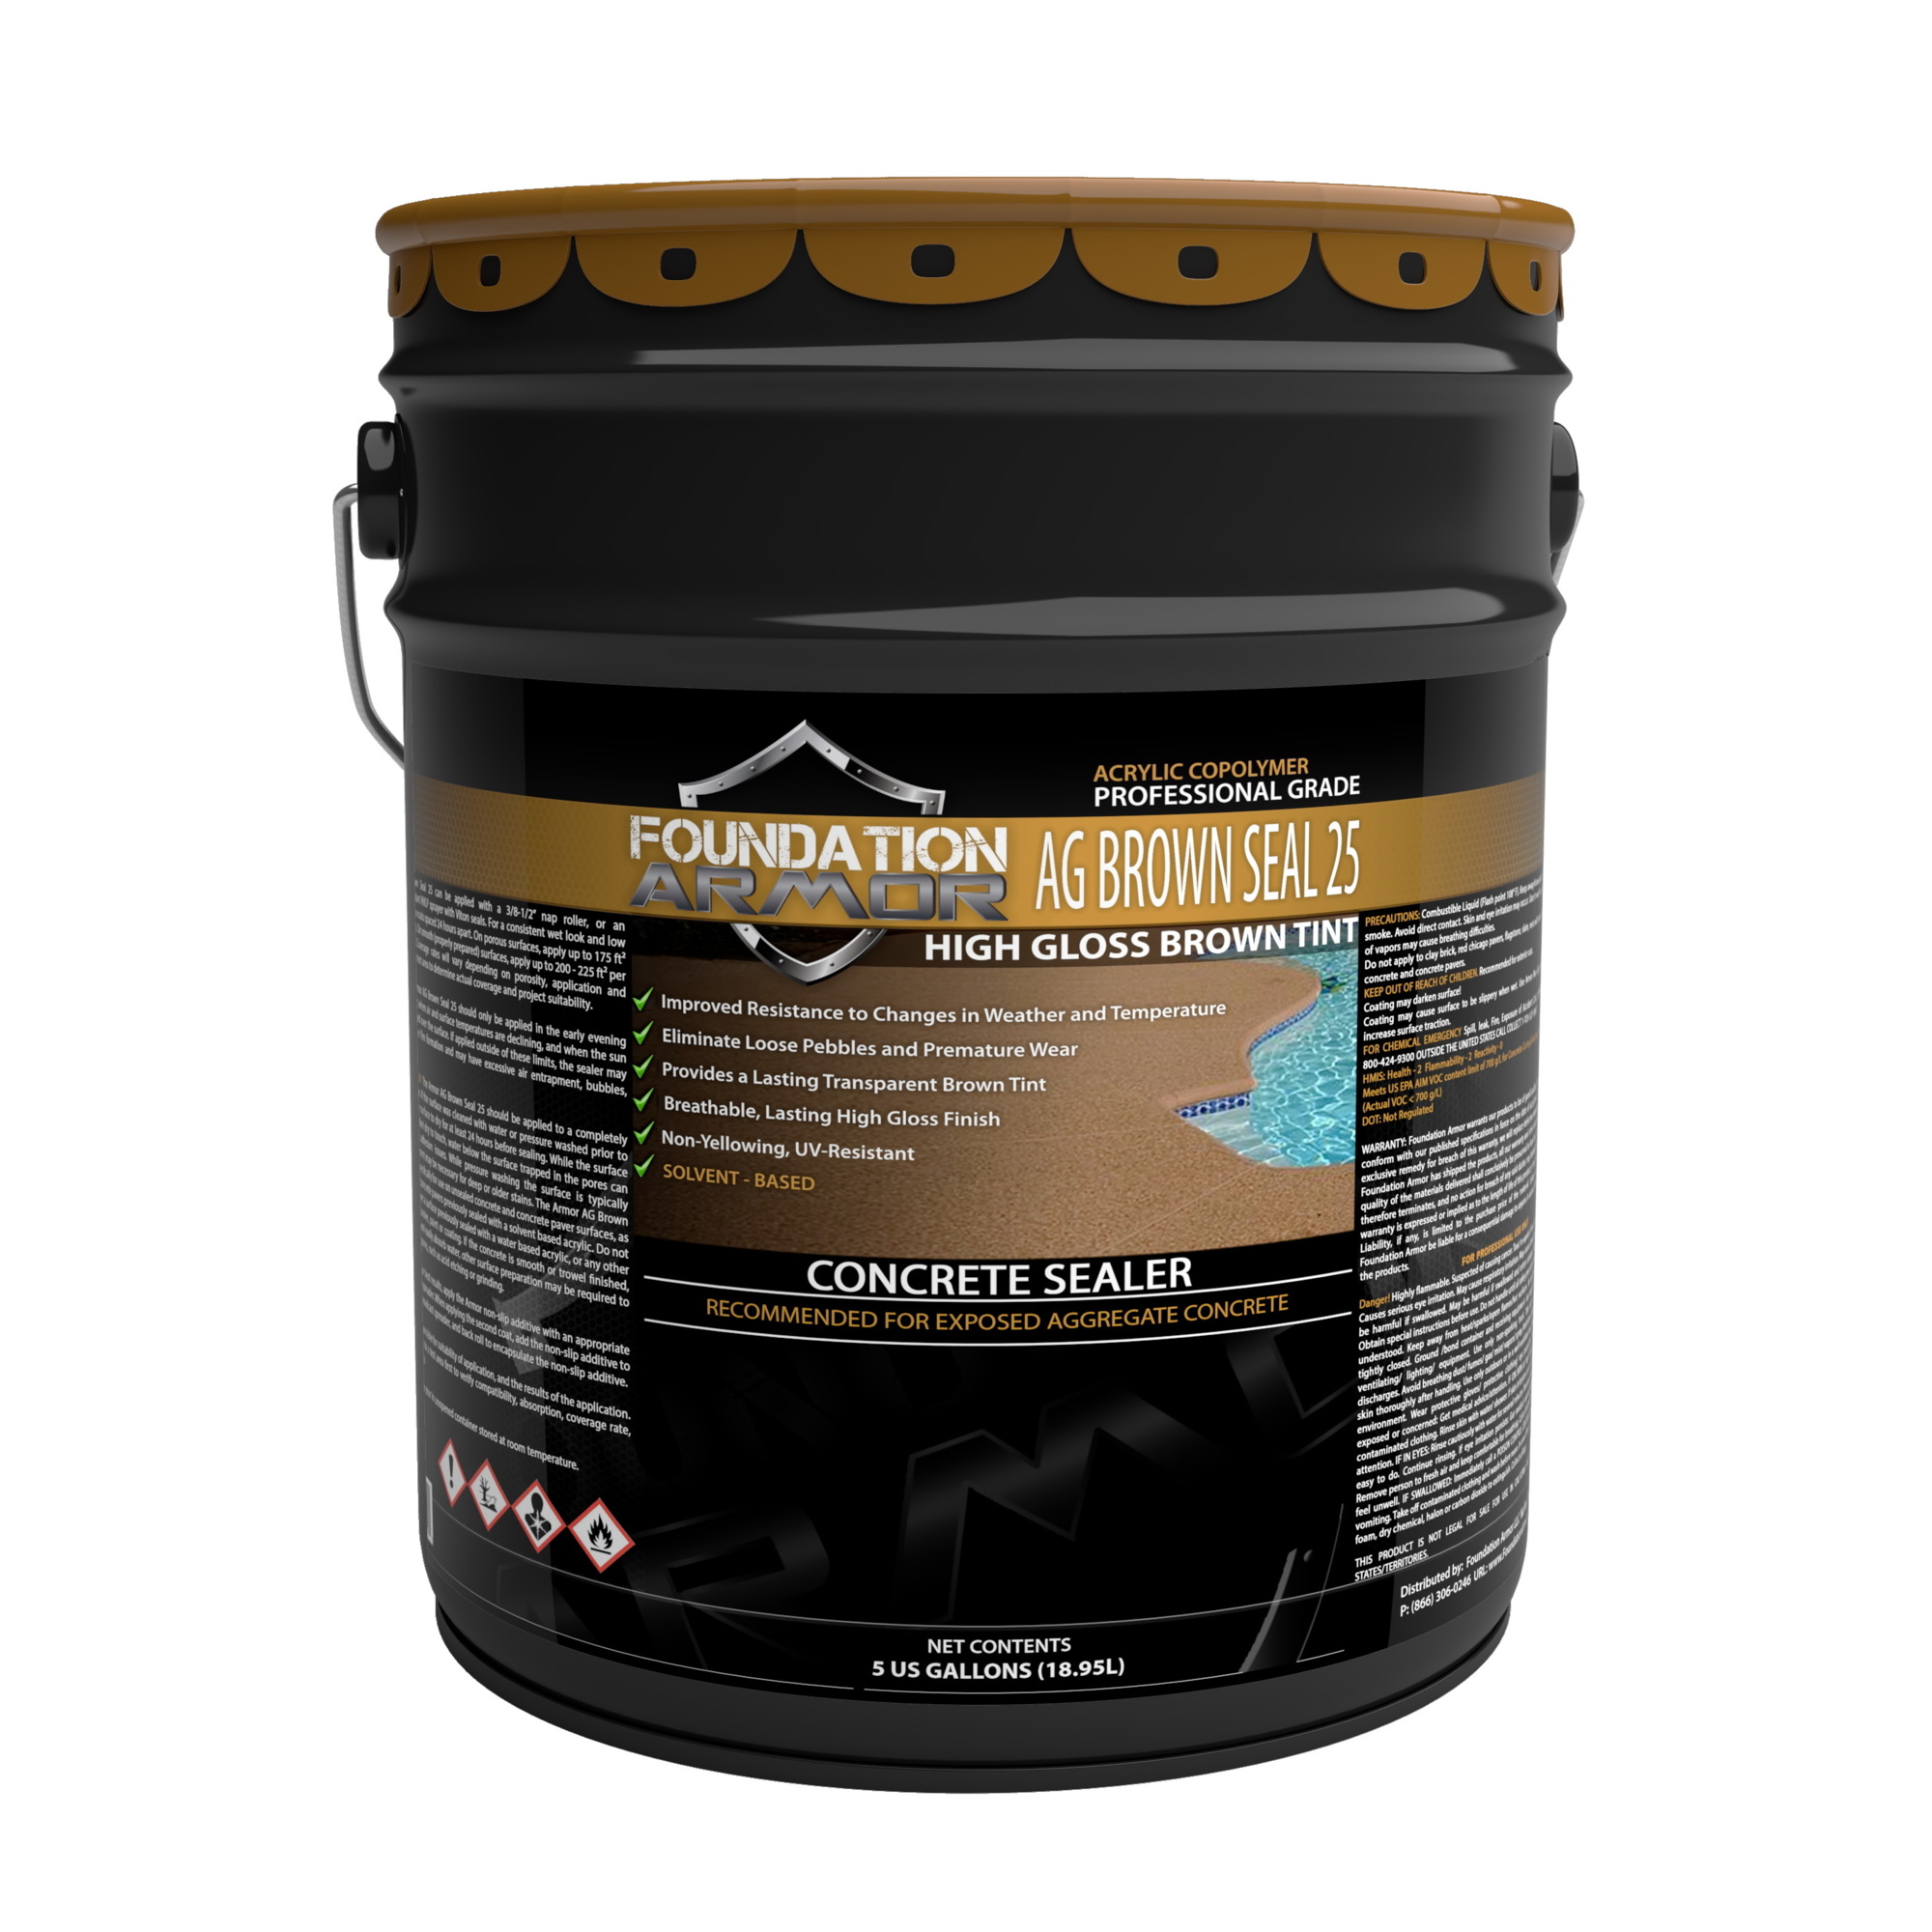 Foundation Armor, Brown-Tinted High Gloss Concrete Sealer, Container Size 5 Gallon, Color Trasparent Brown, Application Method Sprayer or Roller,